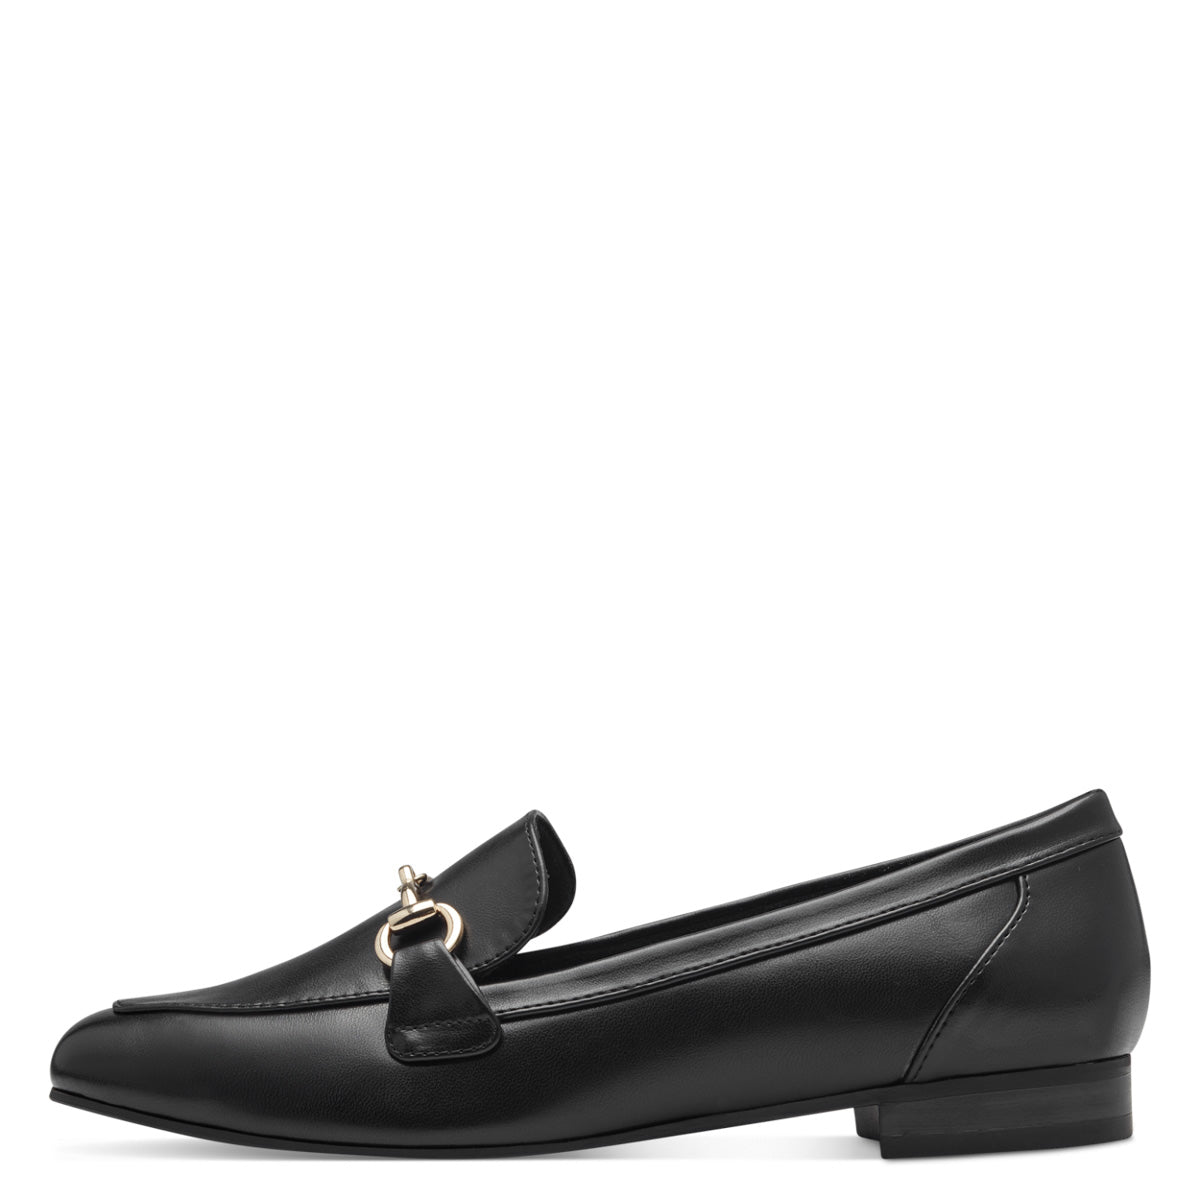 Front view of the Marco Tozzi Black Matte Loafer.